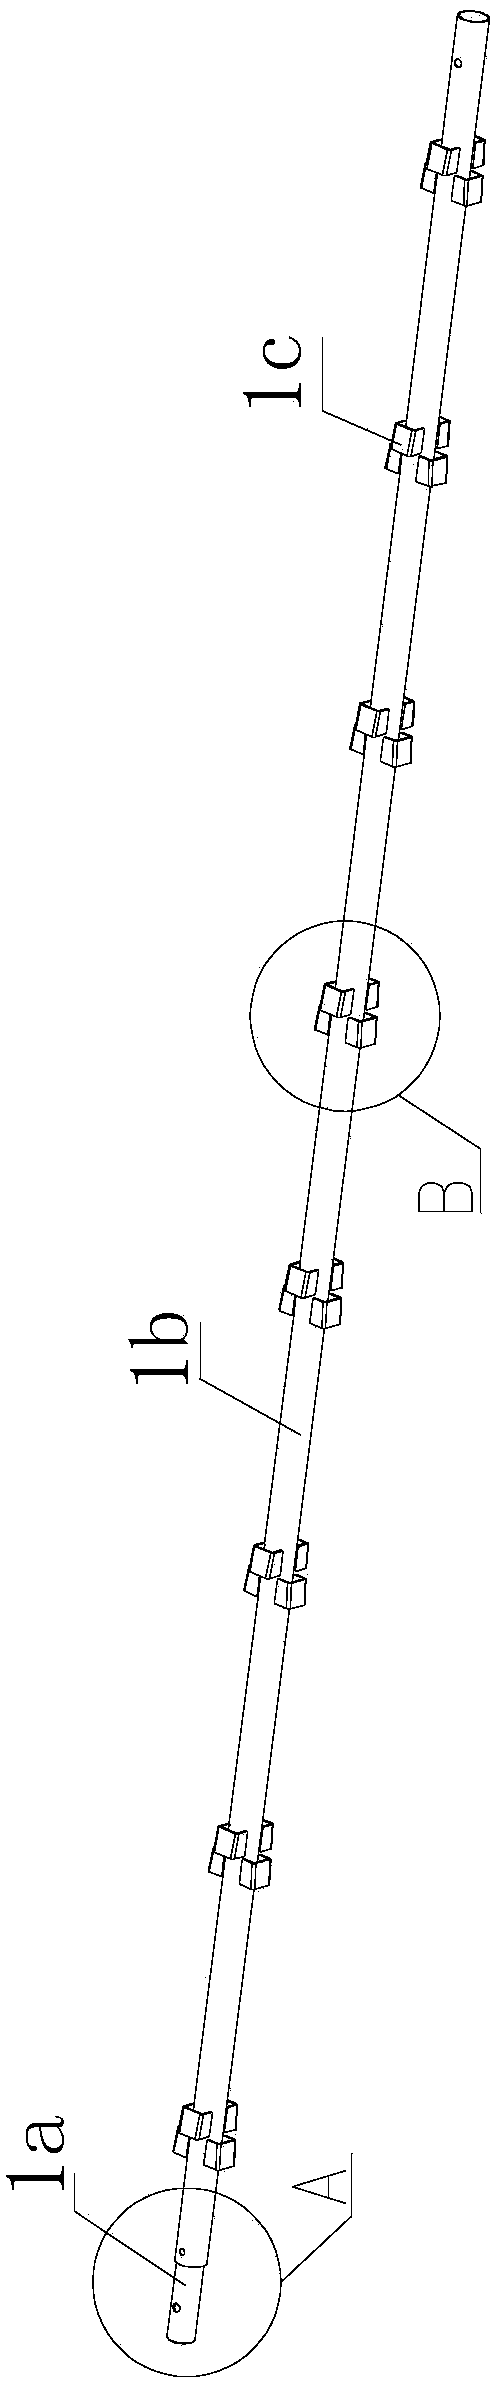 Automatic scaffold welding machine and welding method thereof